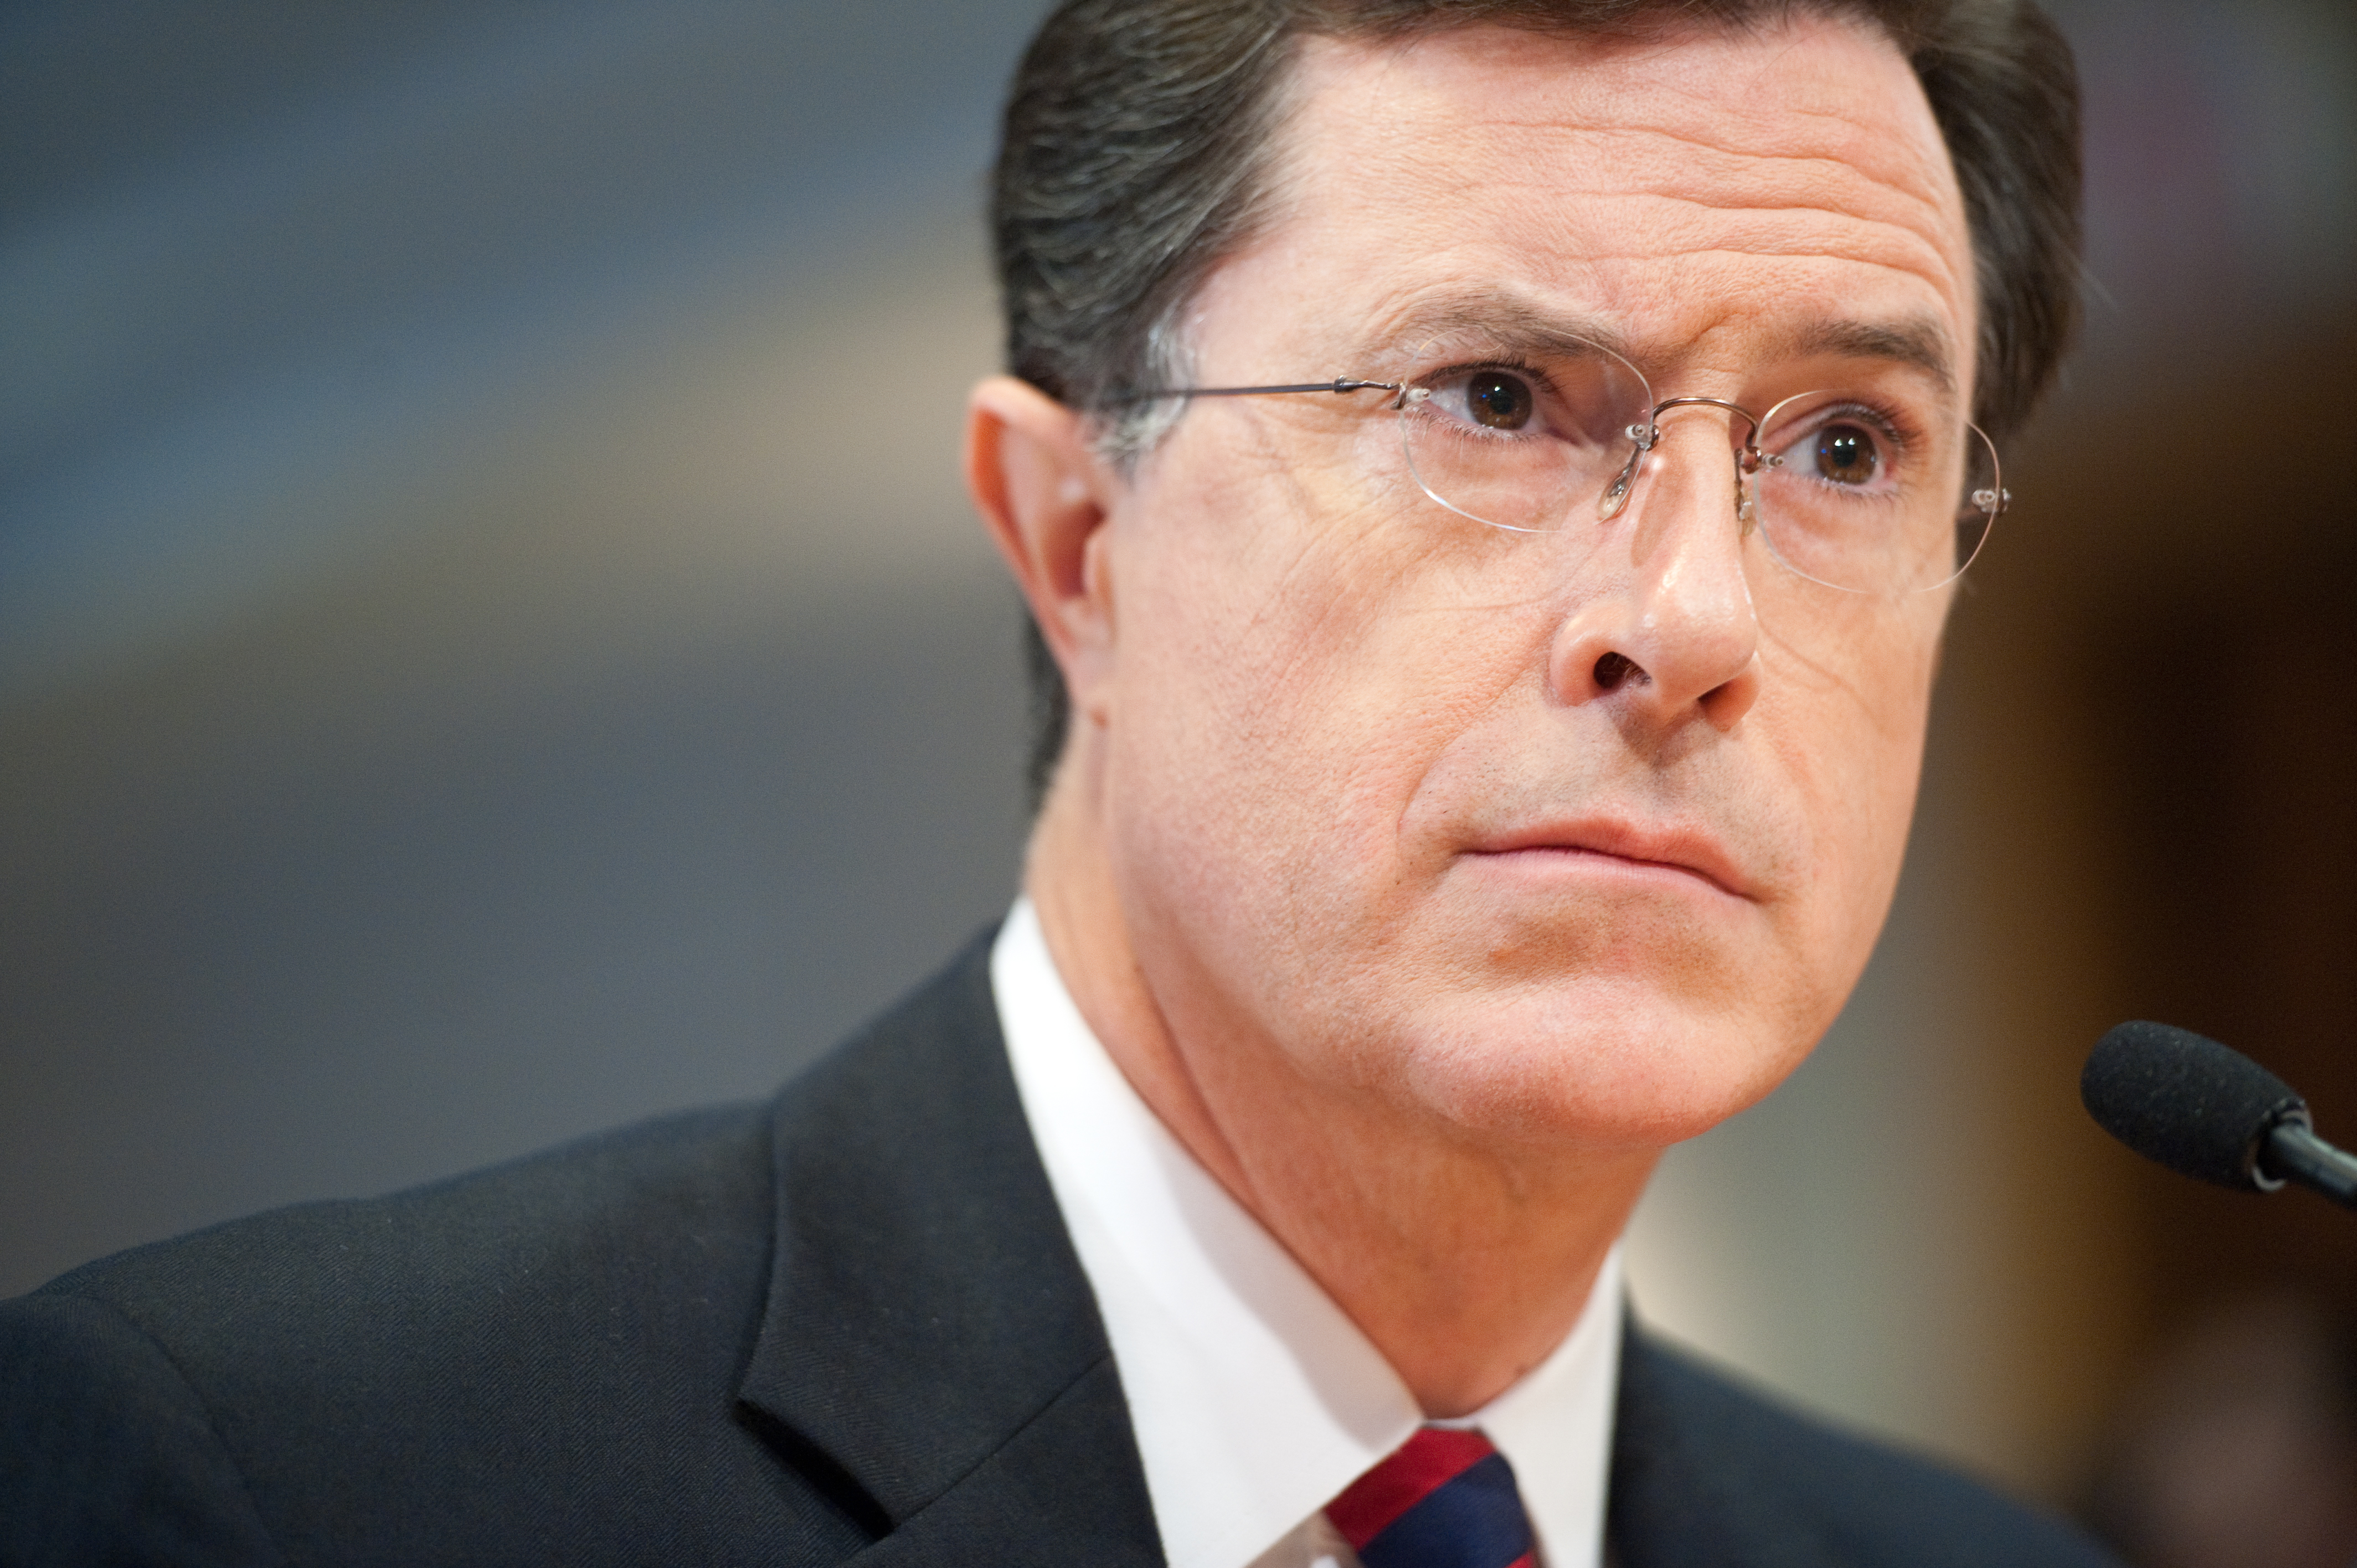 Stephen Colbert listens to a commissioner as he appears at a hearing at the Federal Election Commission in Washington, D.C. to discuss his request to form a Political Action Committee on June 30, 2011.